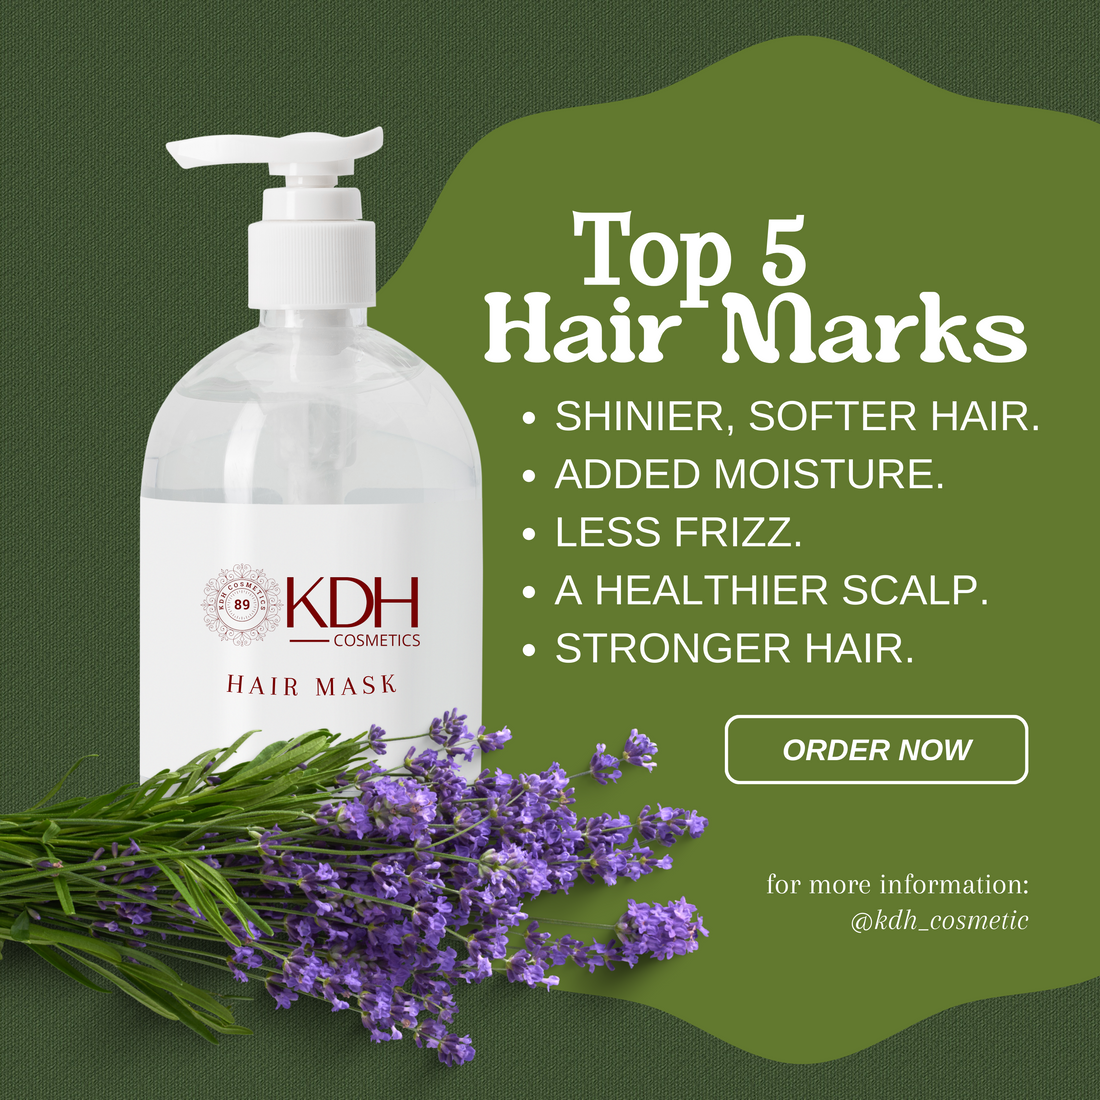 5 of the Very Best Hair Masks “Hair masks are key to healthy hair, no matter the texture.”-KDH Cosmetic